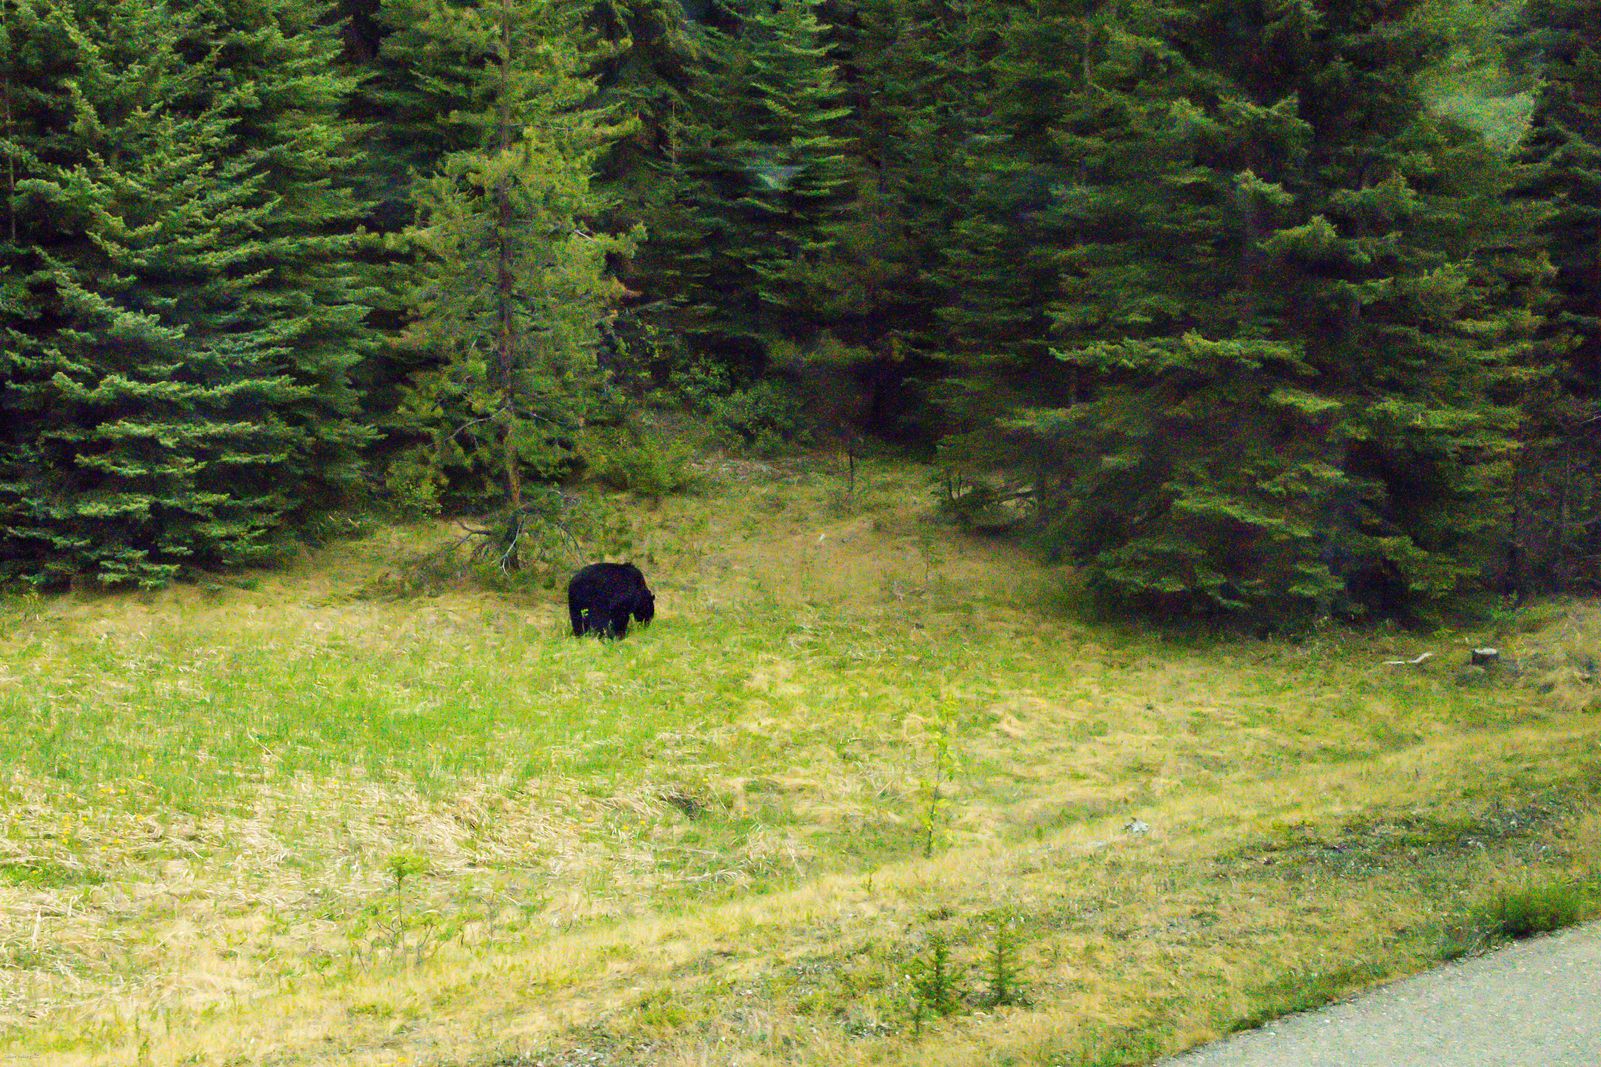 black bear eating dandelions on the side of the road